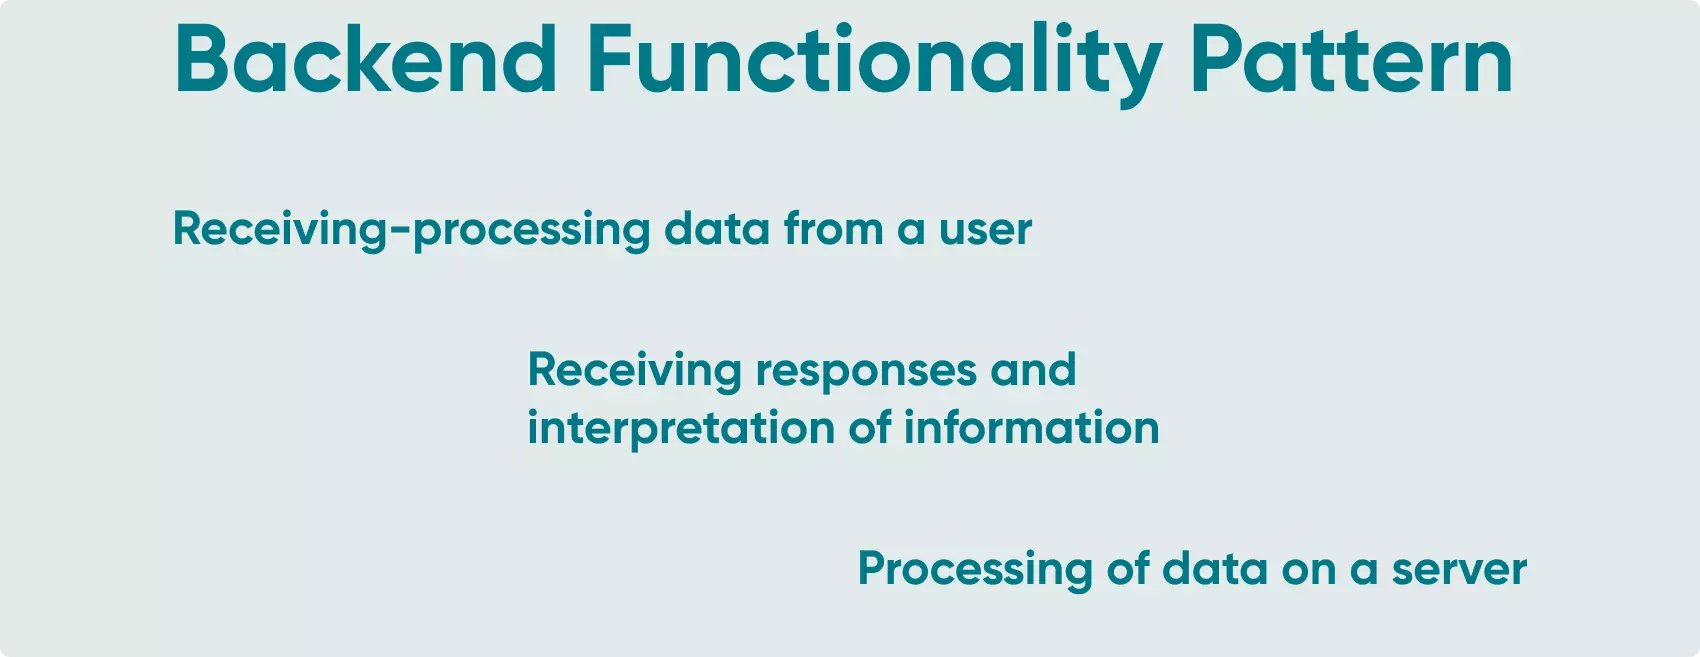 The backend functionality pattern and general software logic come down to three main points: Receiving, Interpretation, and processing.